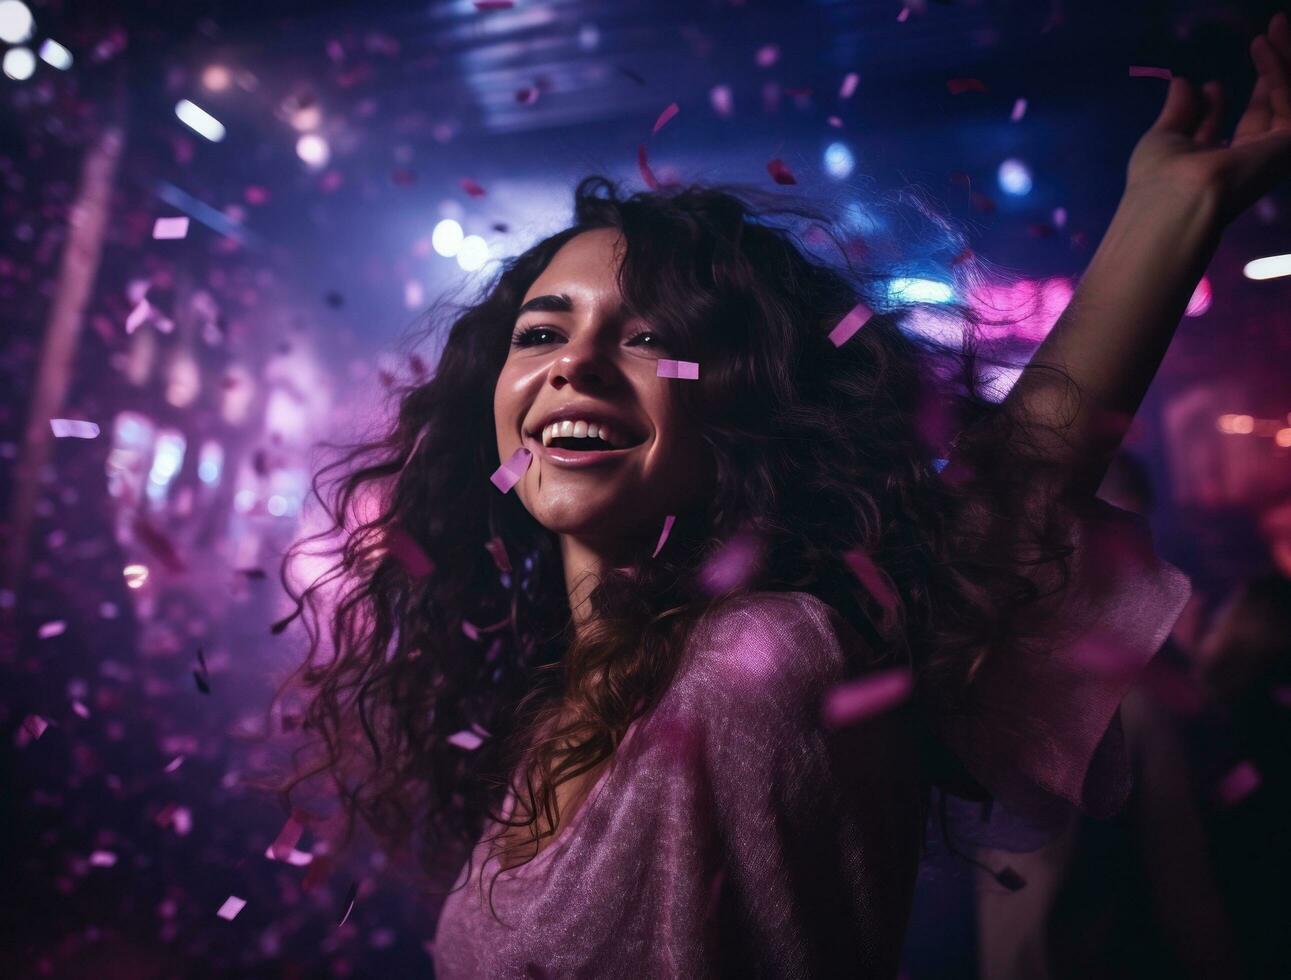 AI generated a young girls dancing in a club or nightclub photo